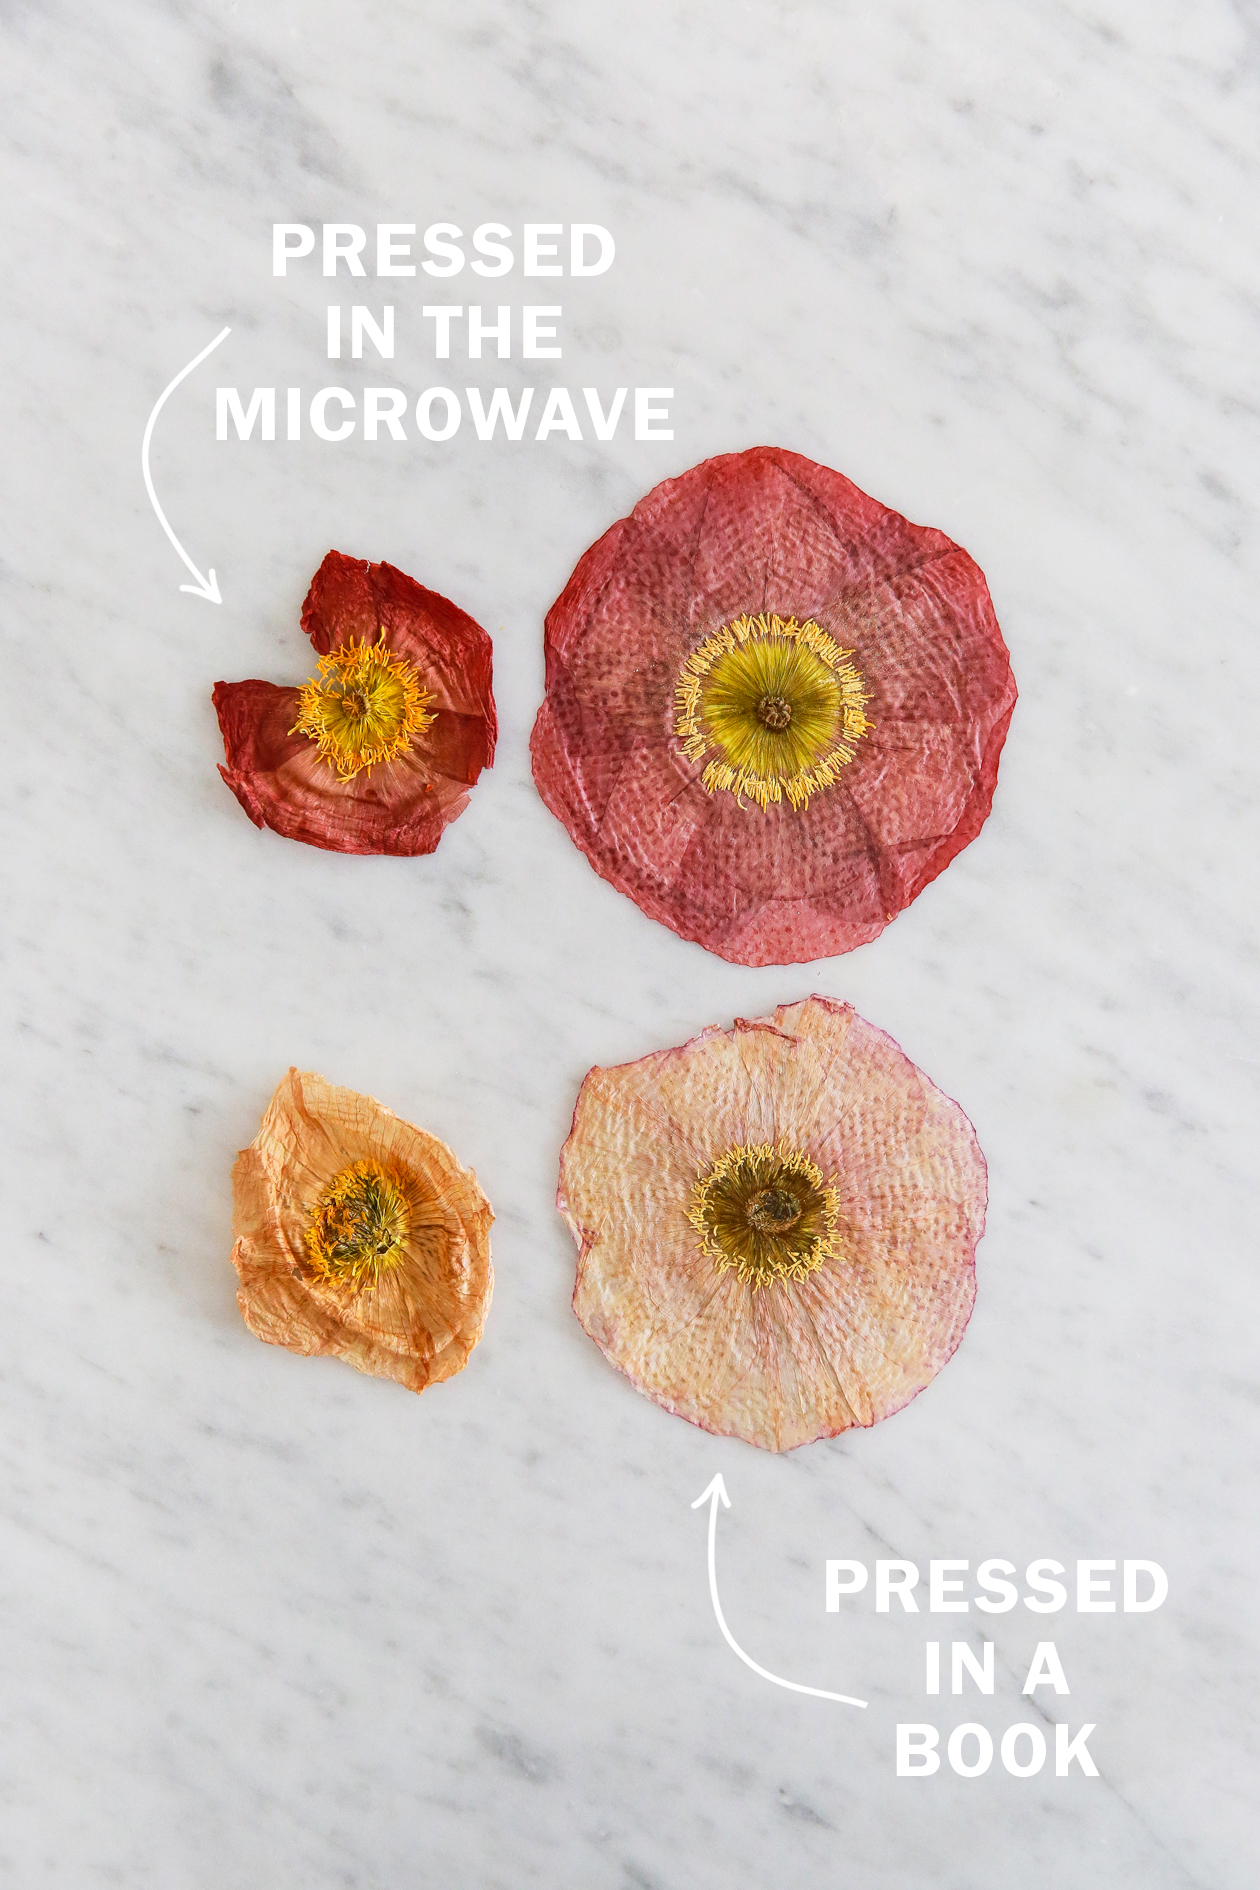 How to press flowers in a book vs how to press flowers in the microwave